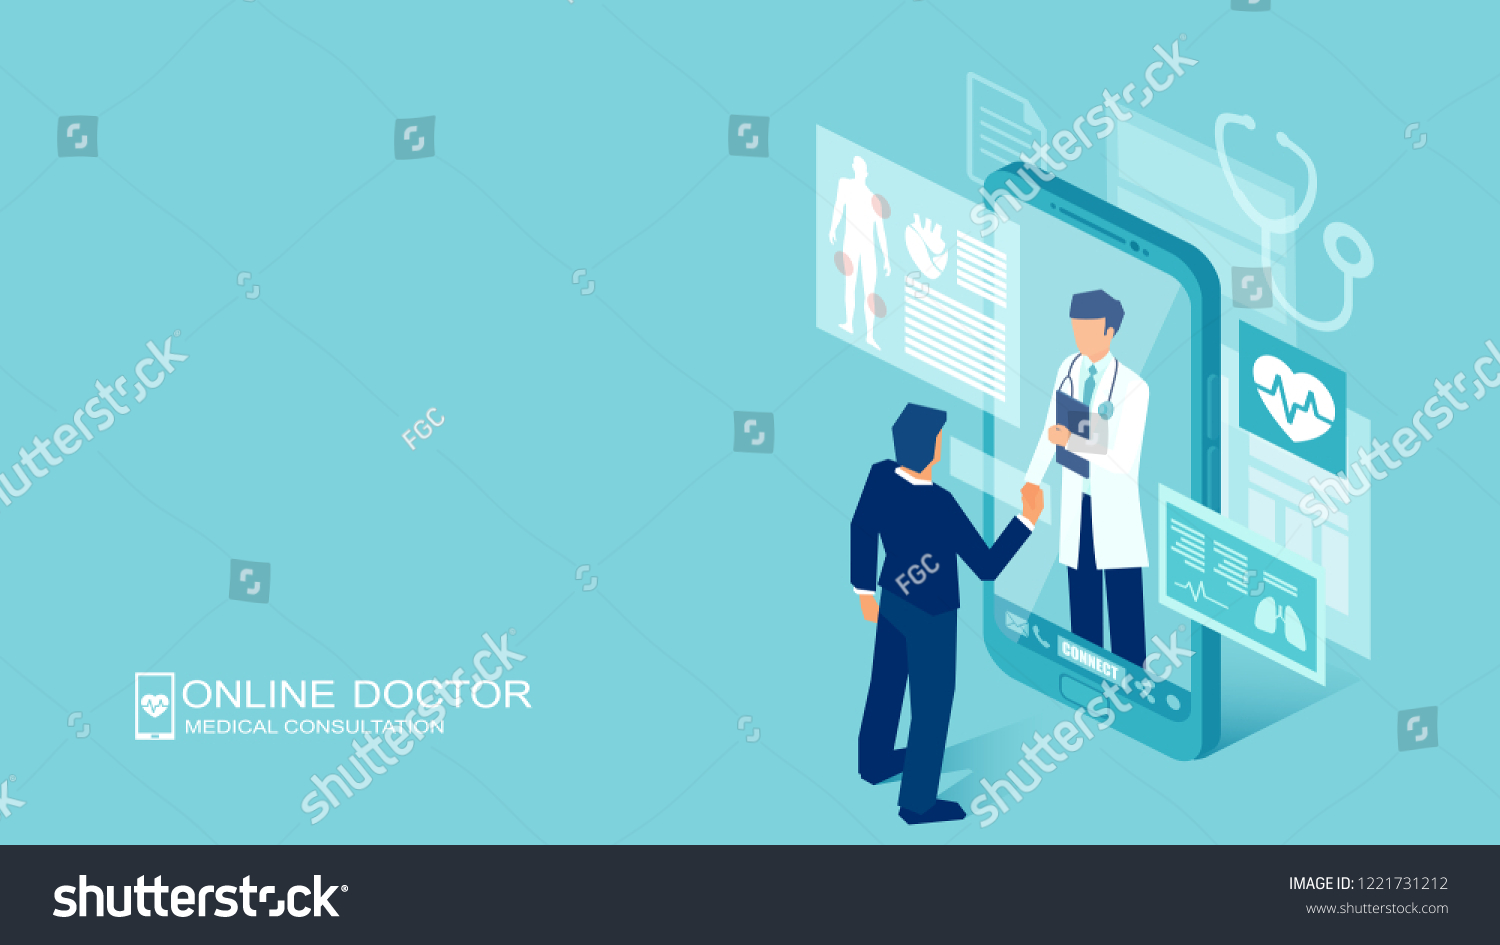 Vector of a patient meeting a doctor online using a smartphone technology, online medical consultation #1221731212